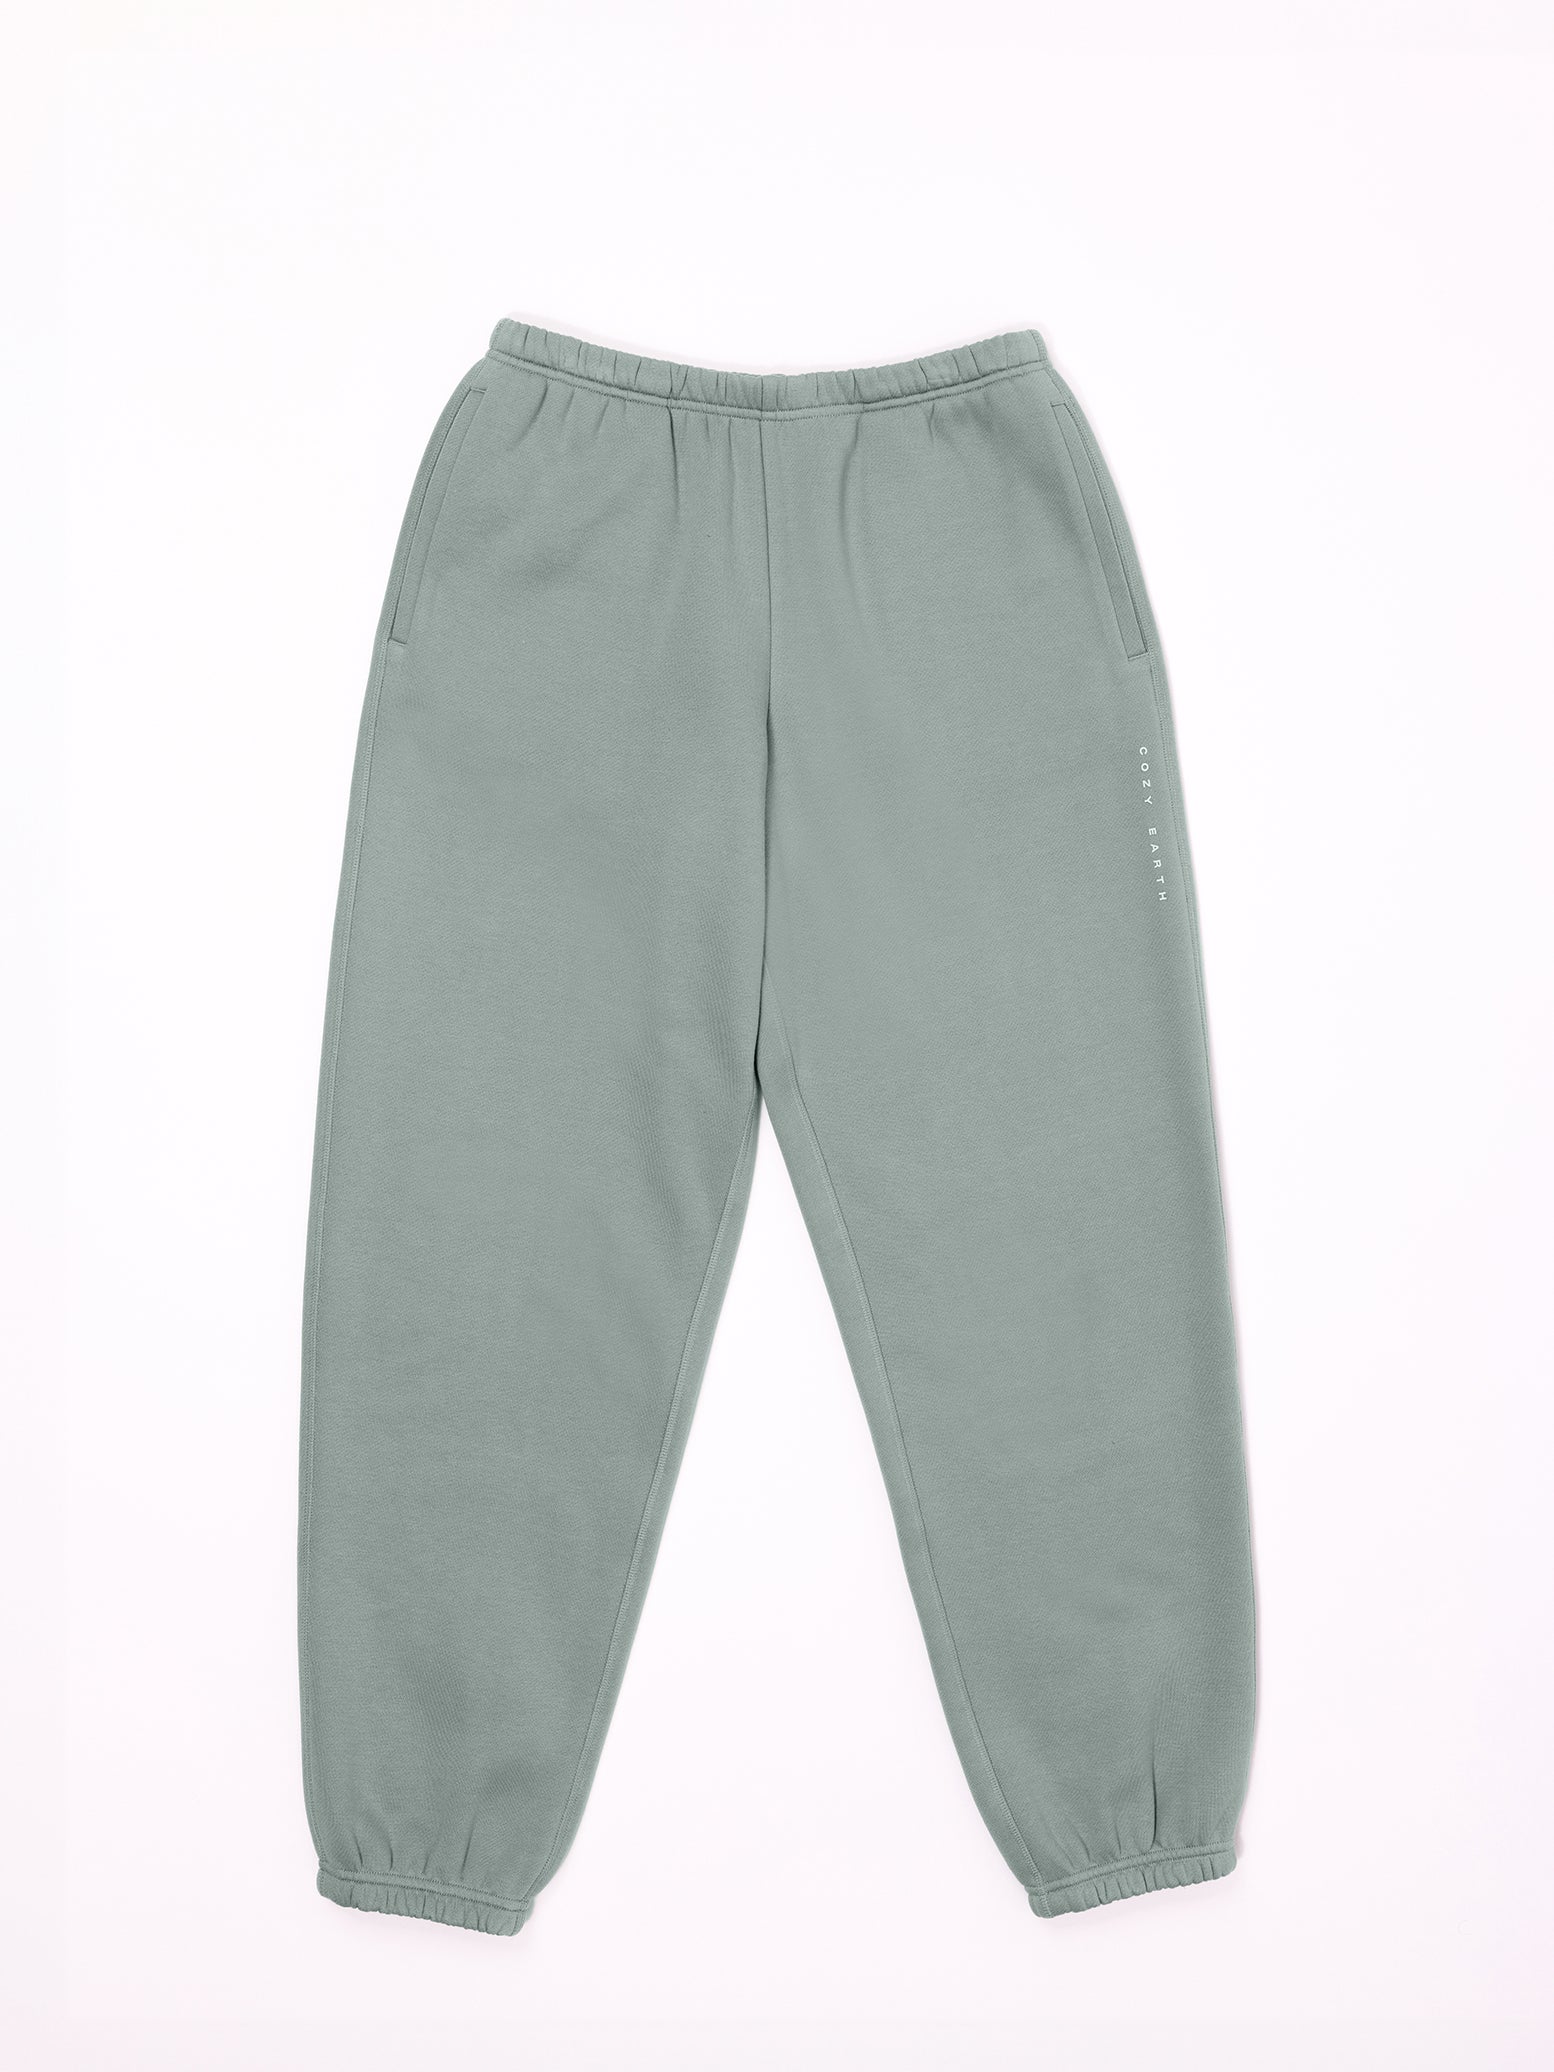 Haze CityScape Joggers. The Joggers are laying flat over a white background. 